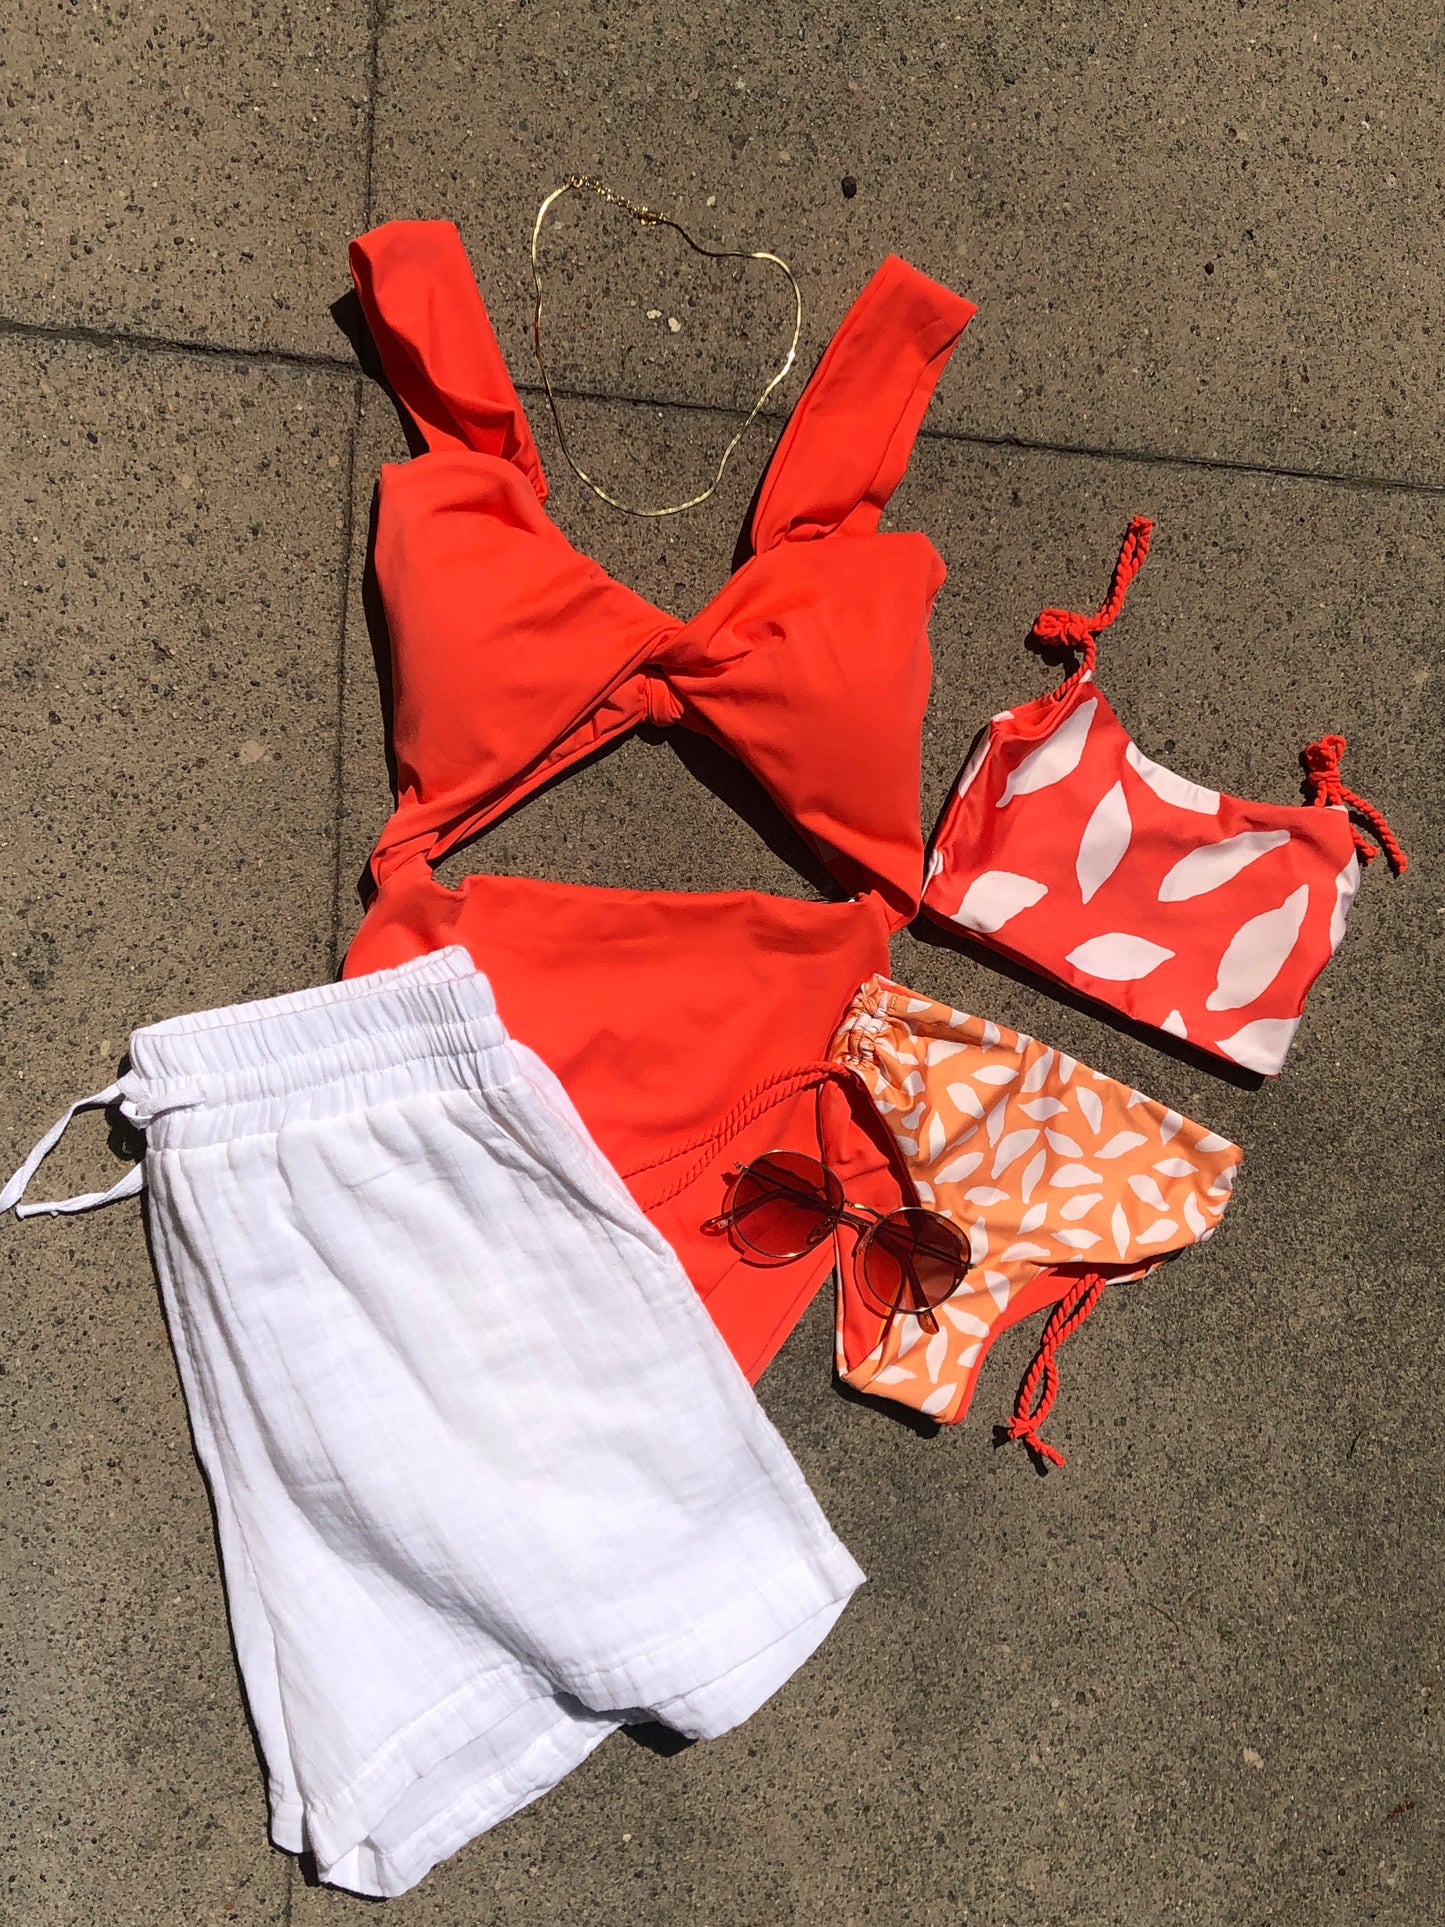 
                  
                    orange one piece swimsuit and matching kids two piece swimsuit with white shorts and accessories
                  
                